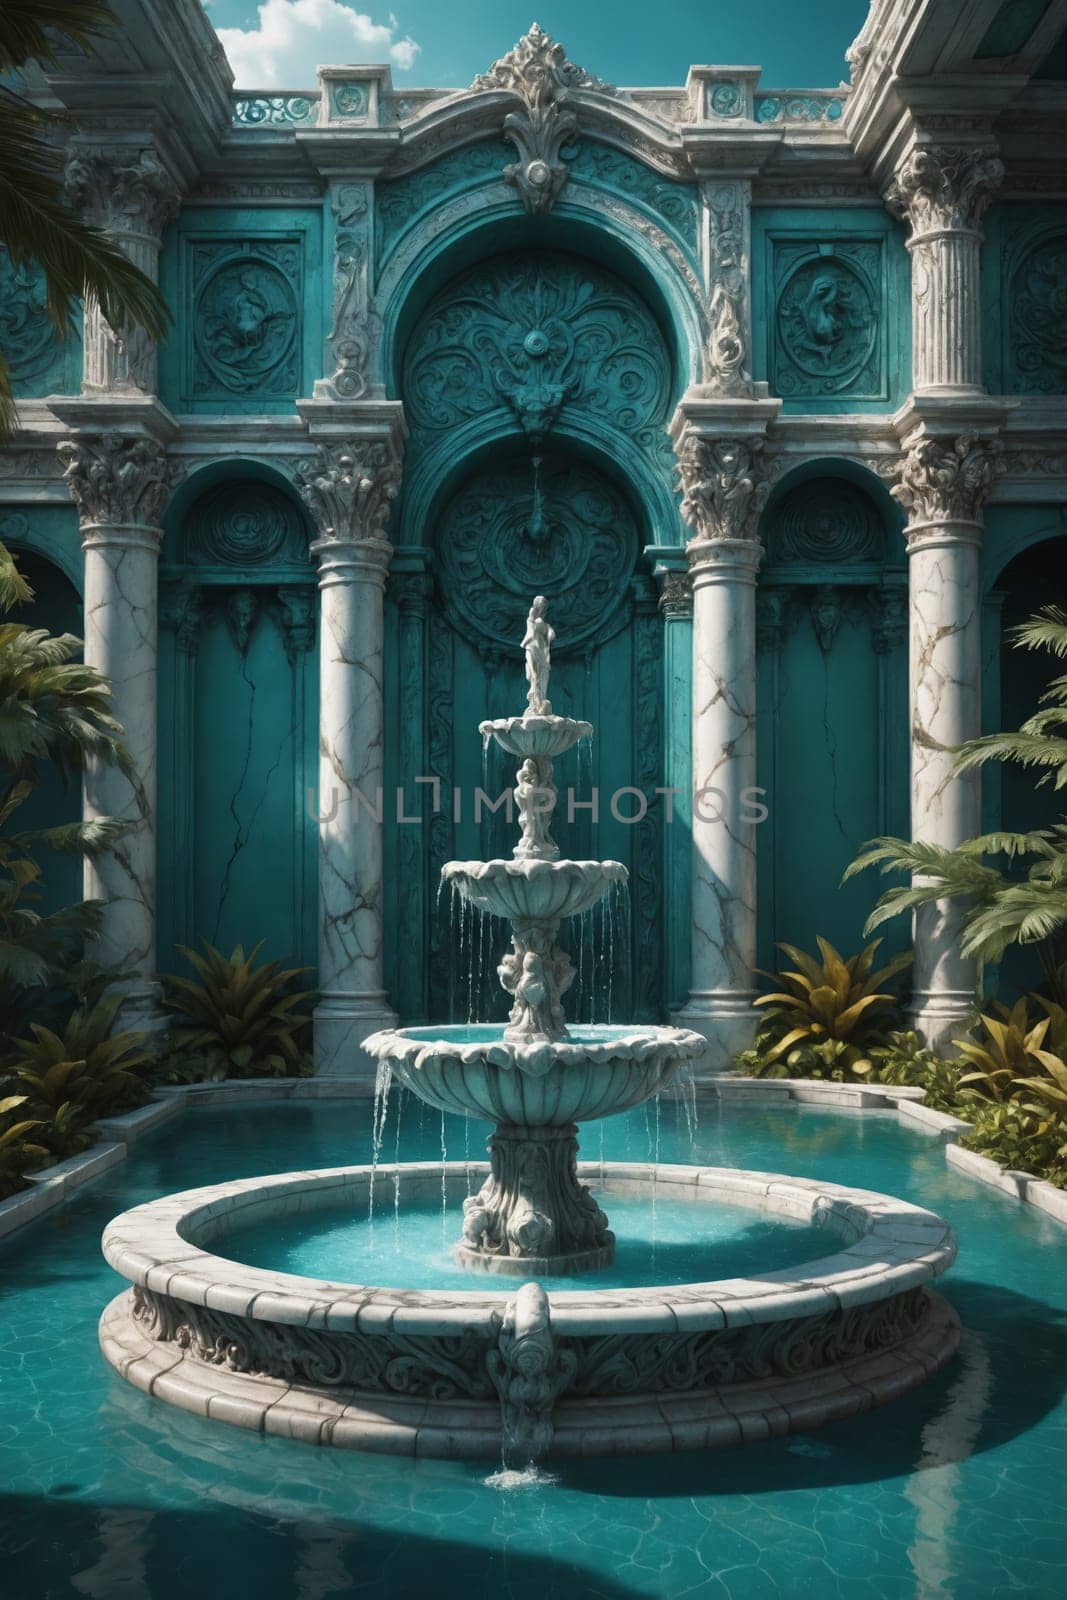 Immerse yourself in a fairytale with this charming illustration of an aqua castle embraced by verdant plants. Perfect for all creative endeavors.